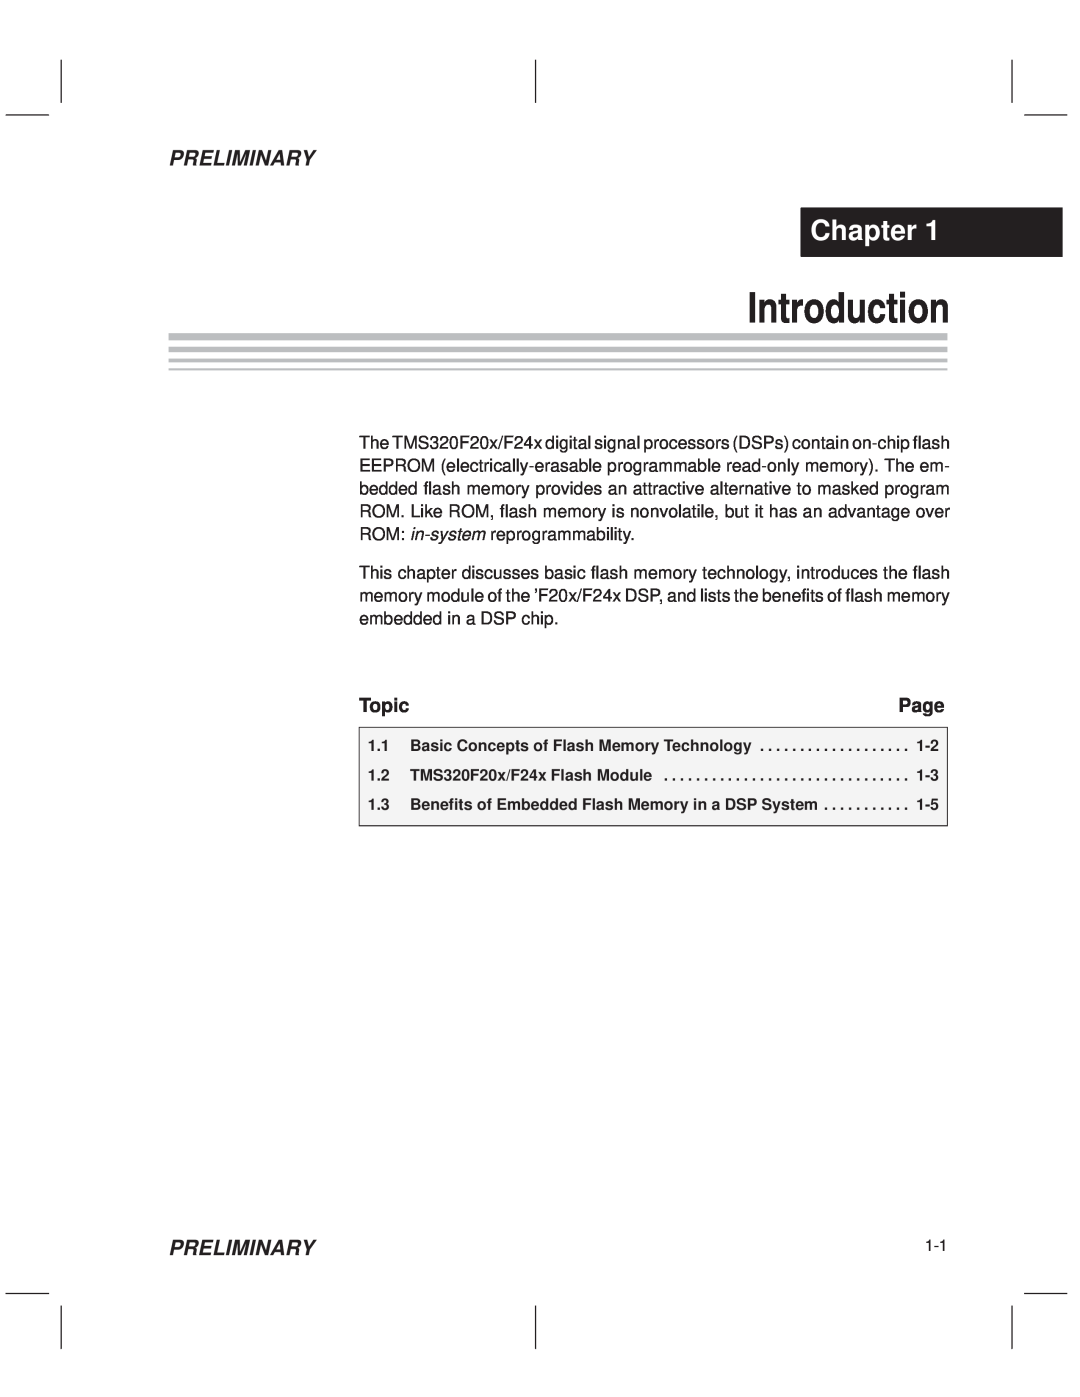 Texas Instruments TMS320F20x/F24x DSP manual Introduction, Chapter, Page, Topic, Preliminary 